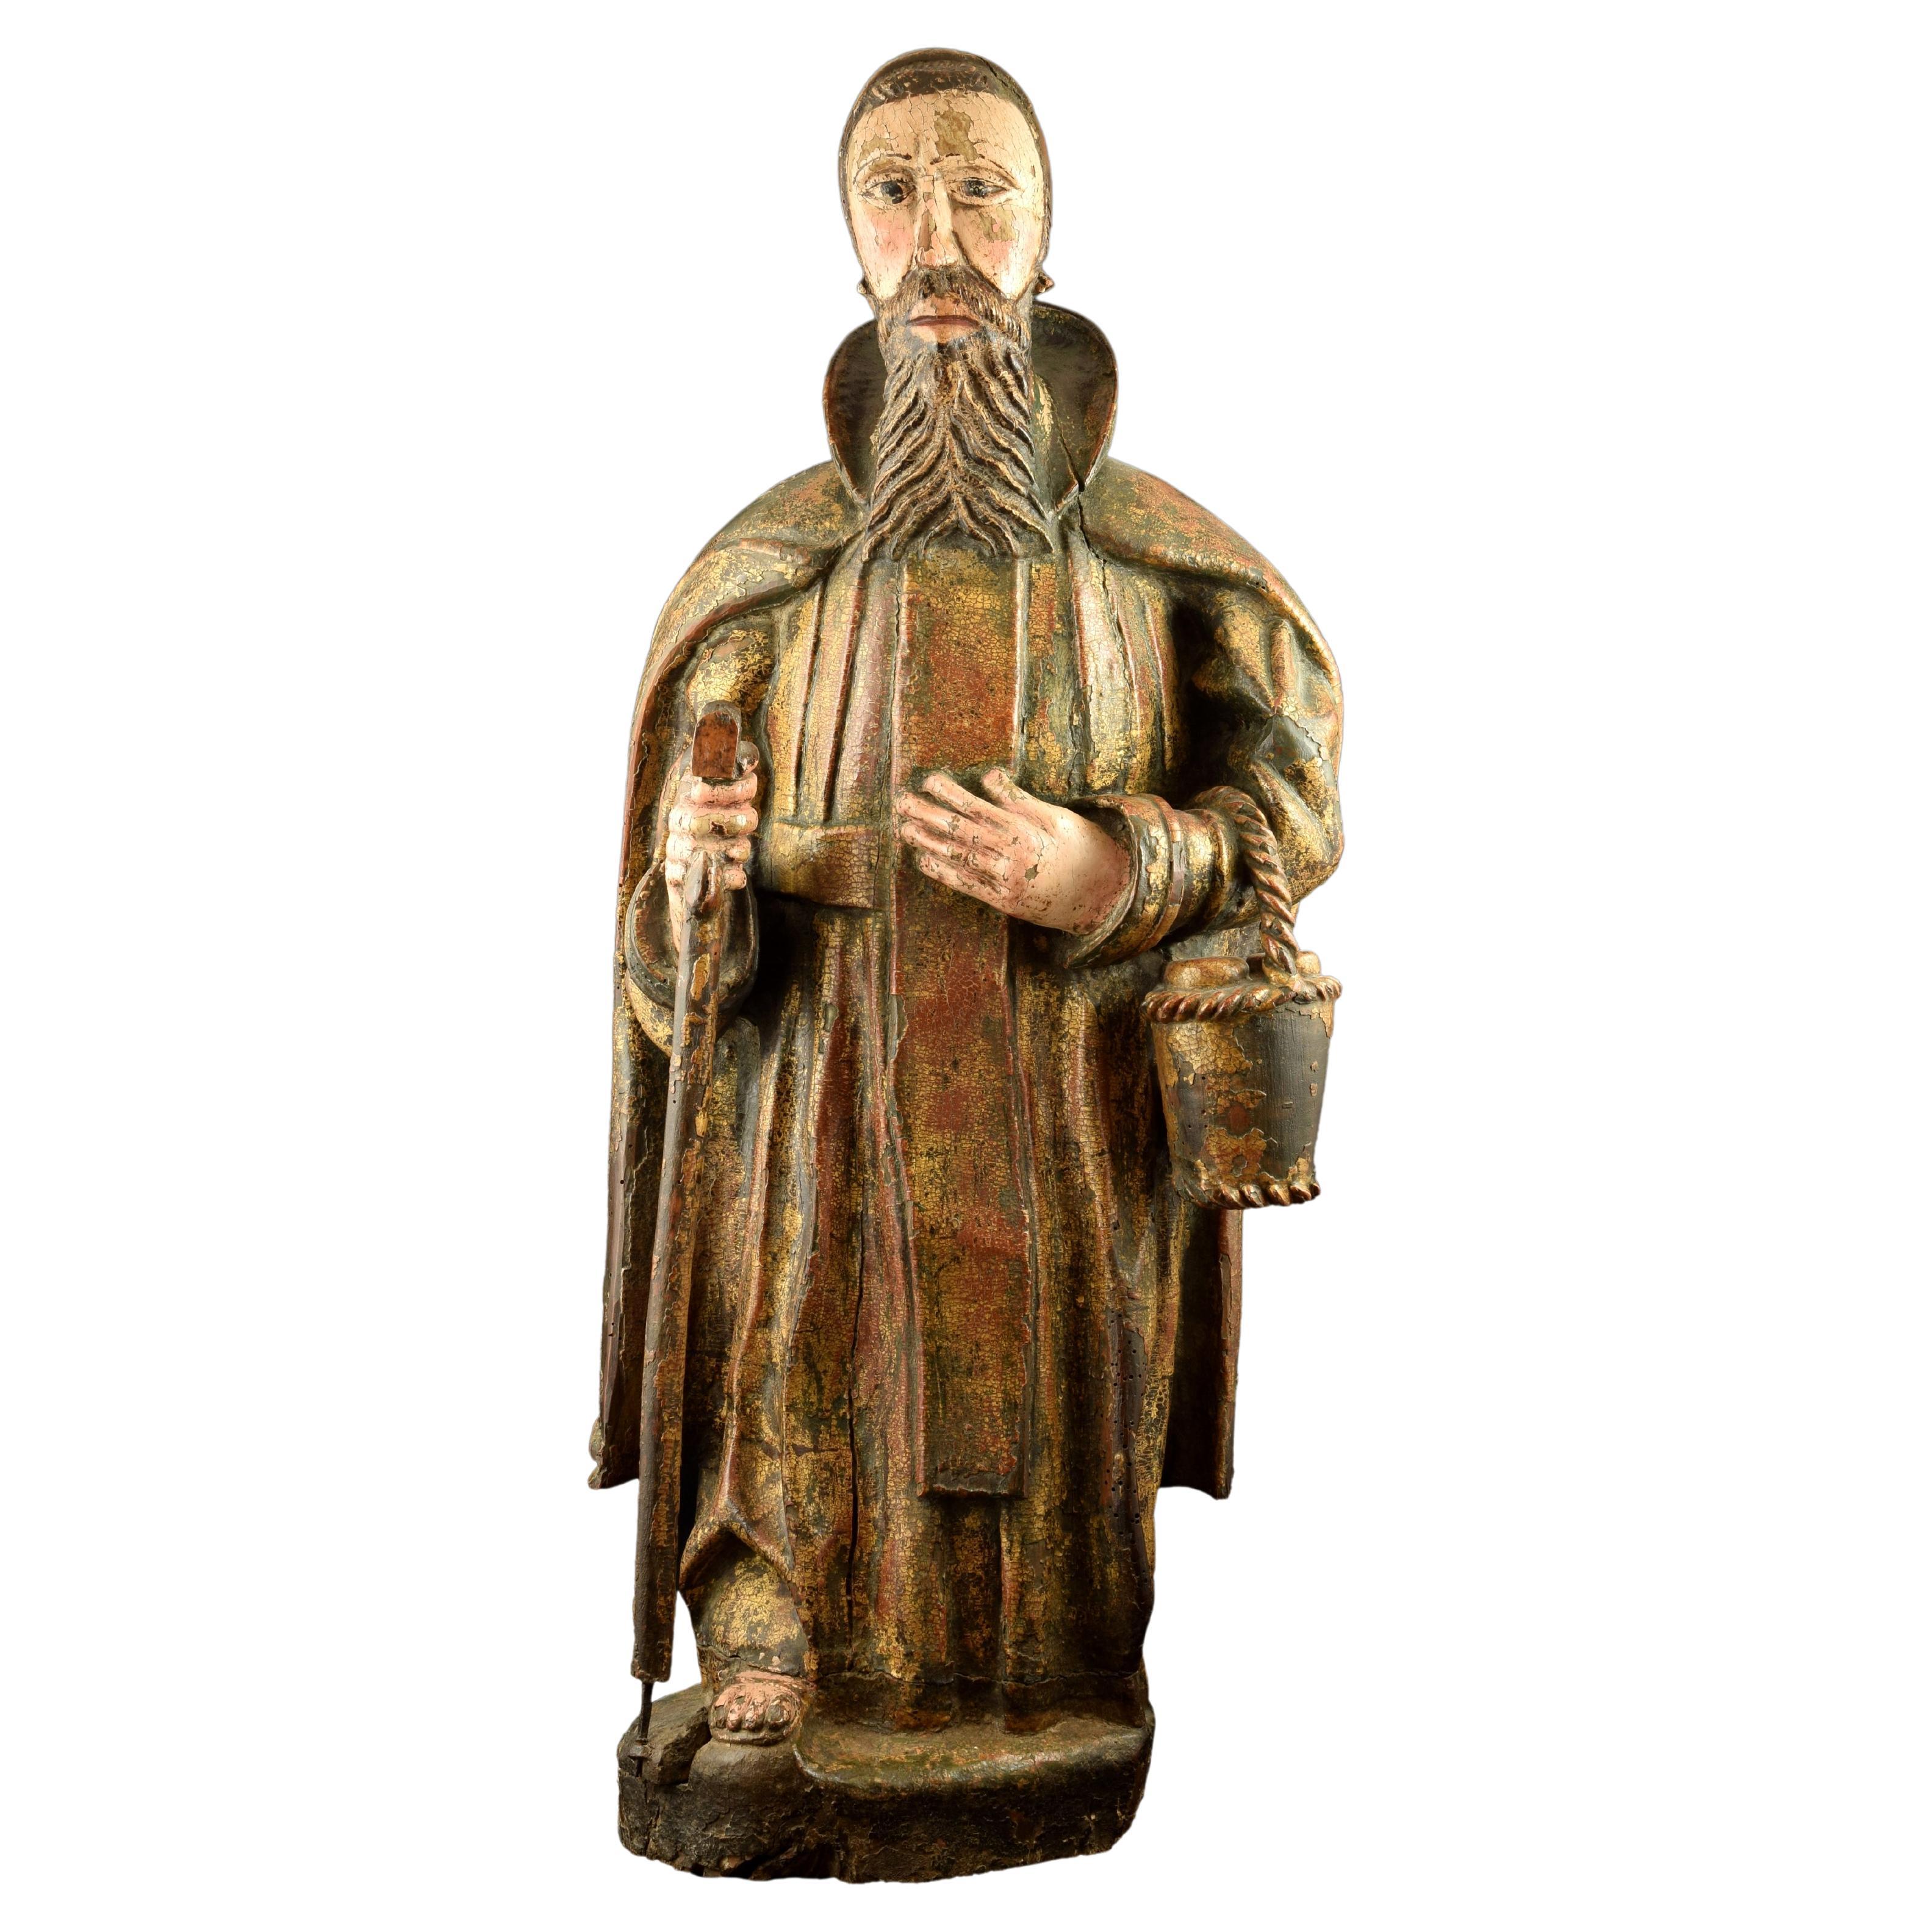 Polychrome Wooden Sculpture Possibly Saint Fiacre, 16th Century